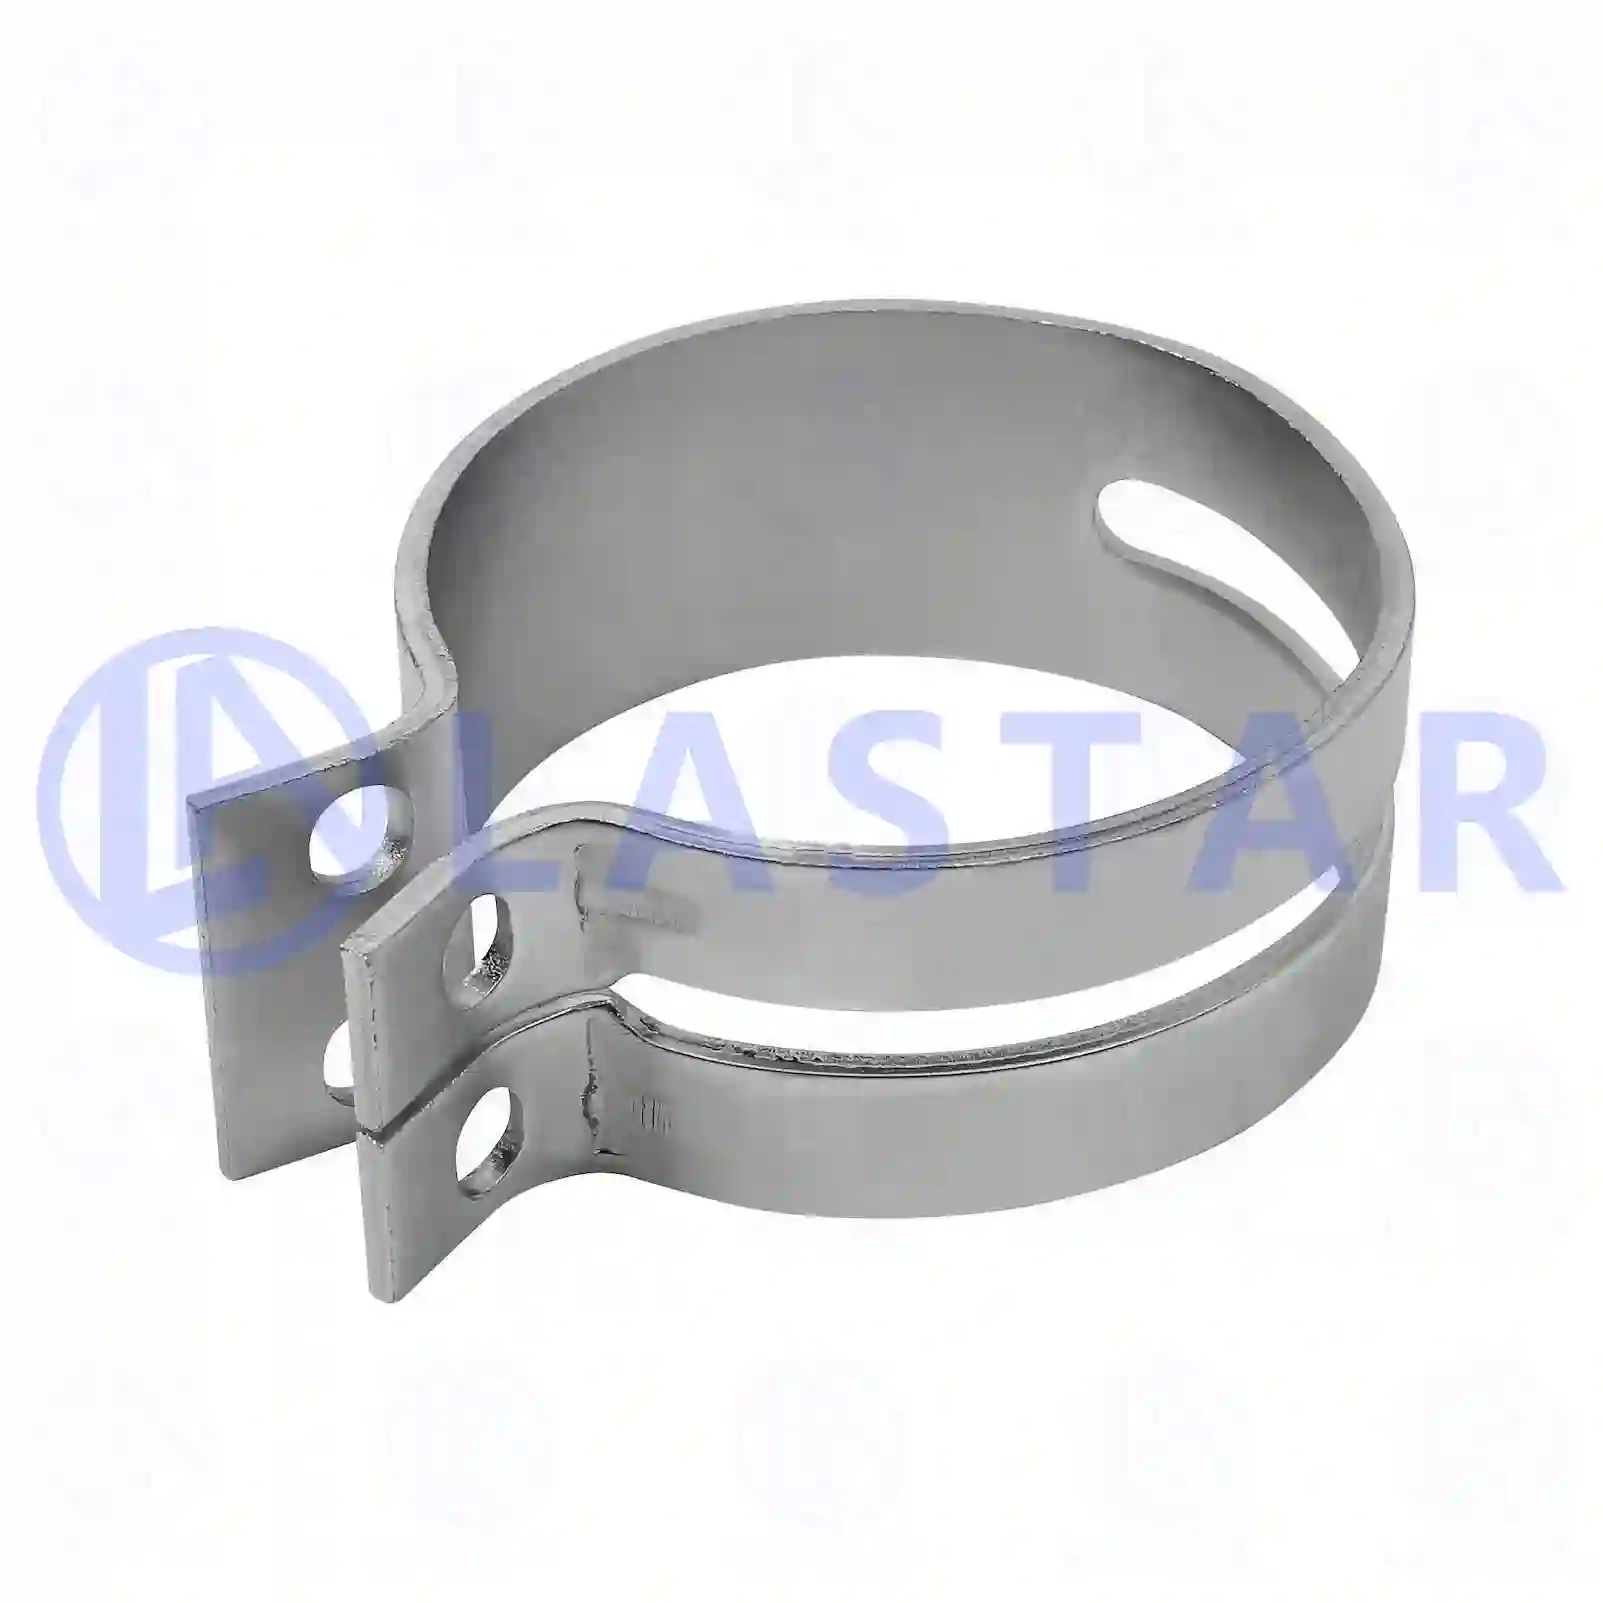 Clamp, 77706293, 6254920040 ||  77706293 Lastar Spare Part | Truck Spare Parts, Auotomotive Spare Parts Clamp, 77706293, 6254920040 ||  77706293 Lastar Spare Part | Truck Spare Parts, Auotomotive Spare Parts